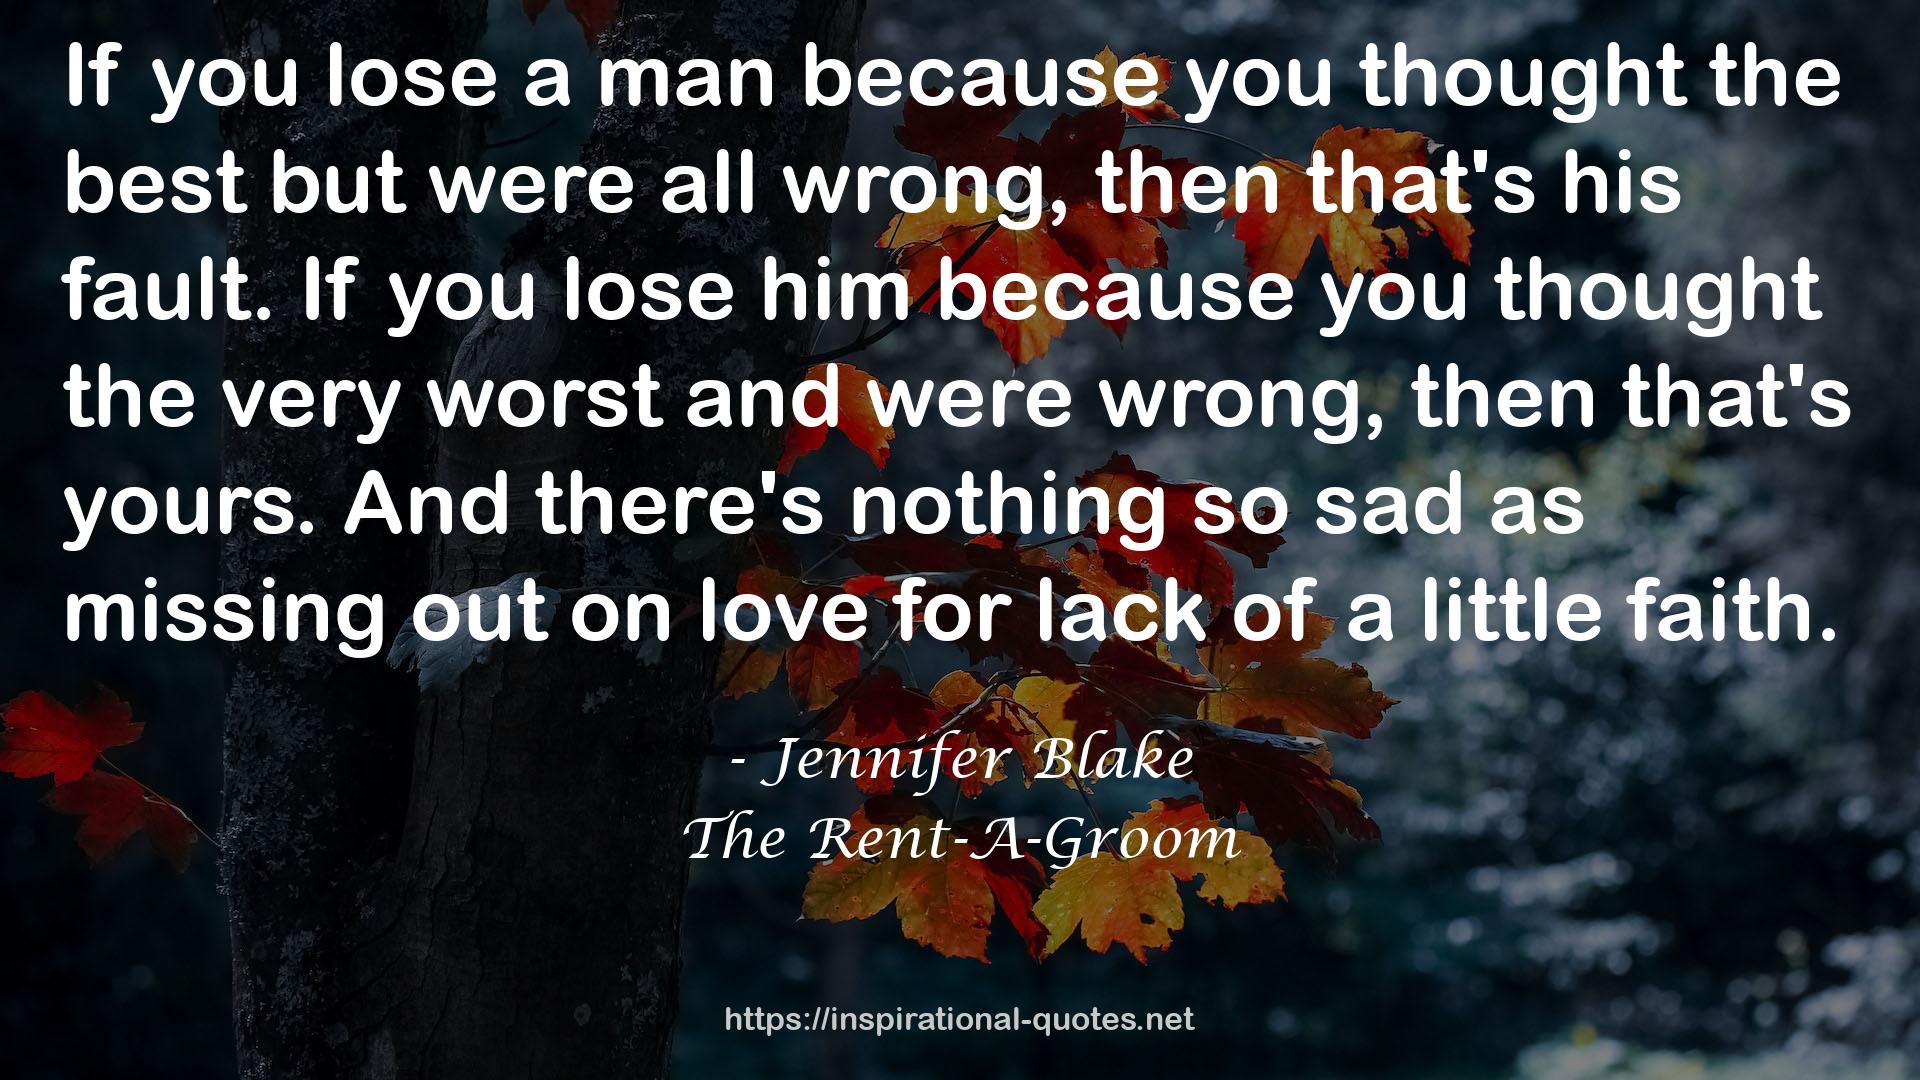 The Rent-A-Groom QUOTES